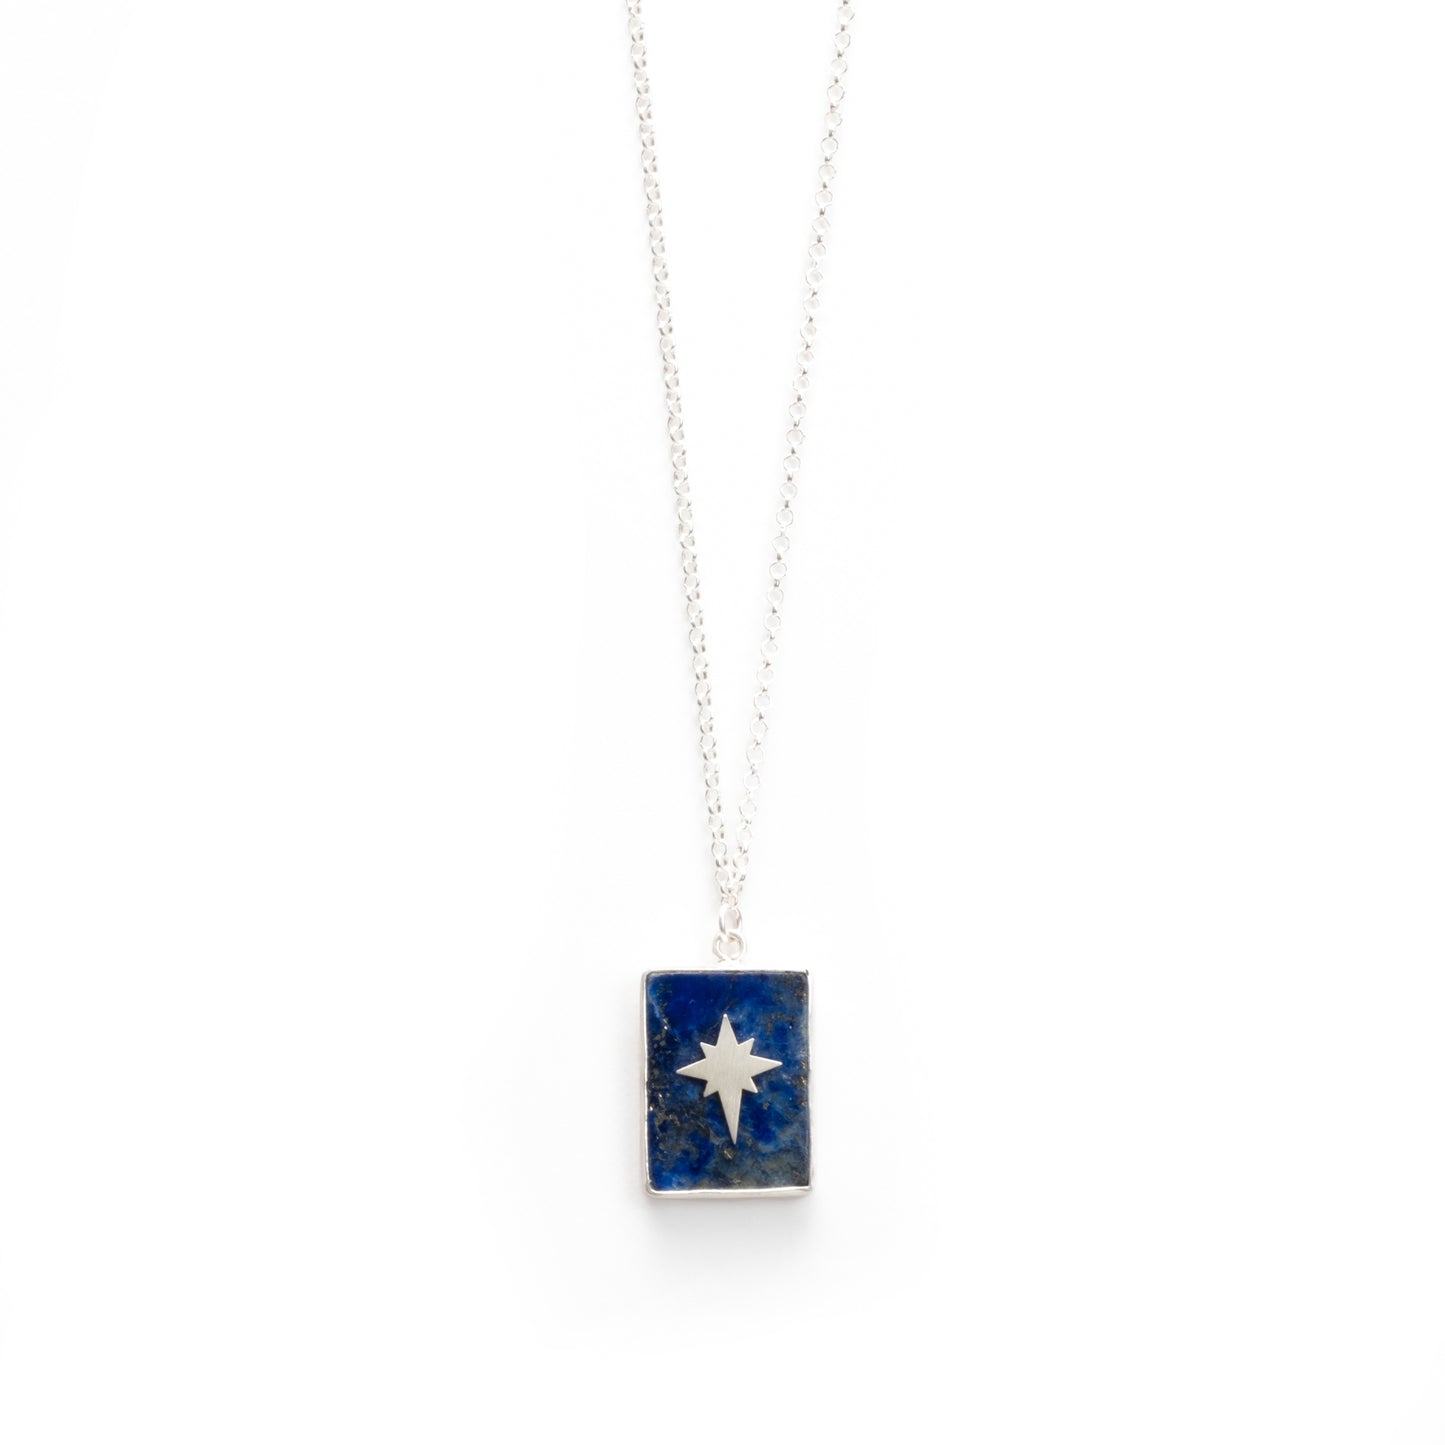 Necklace with Lapis Lazuli Pendant, Moon and North Star Pendant Options